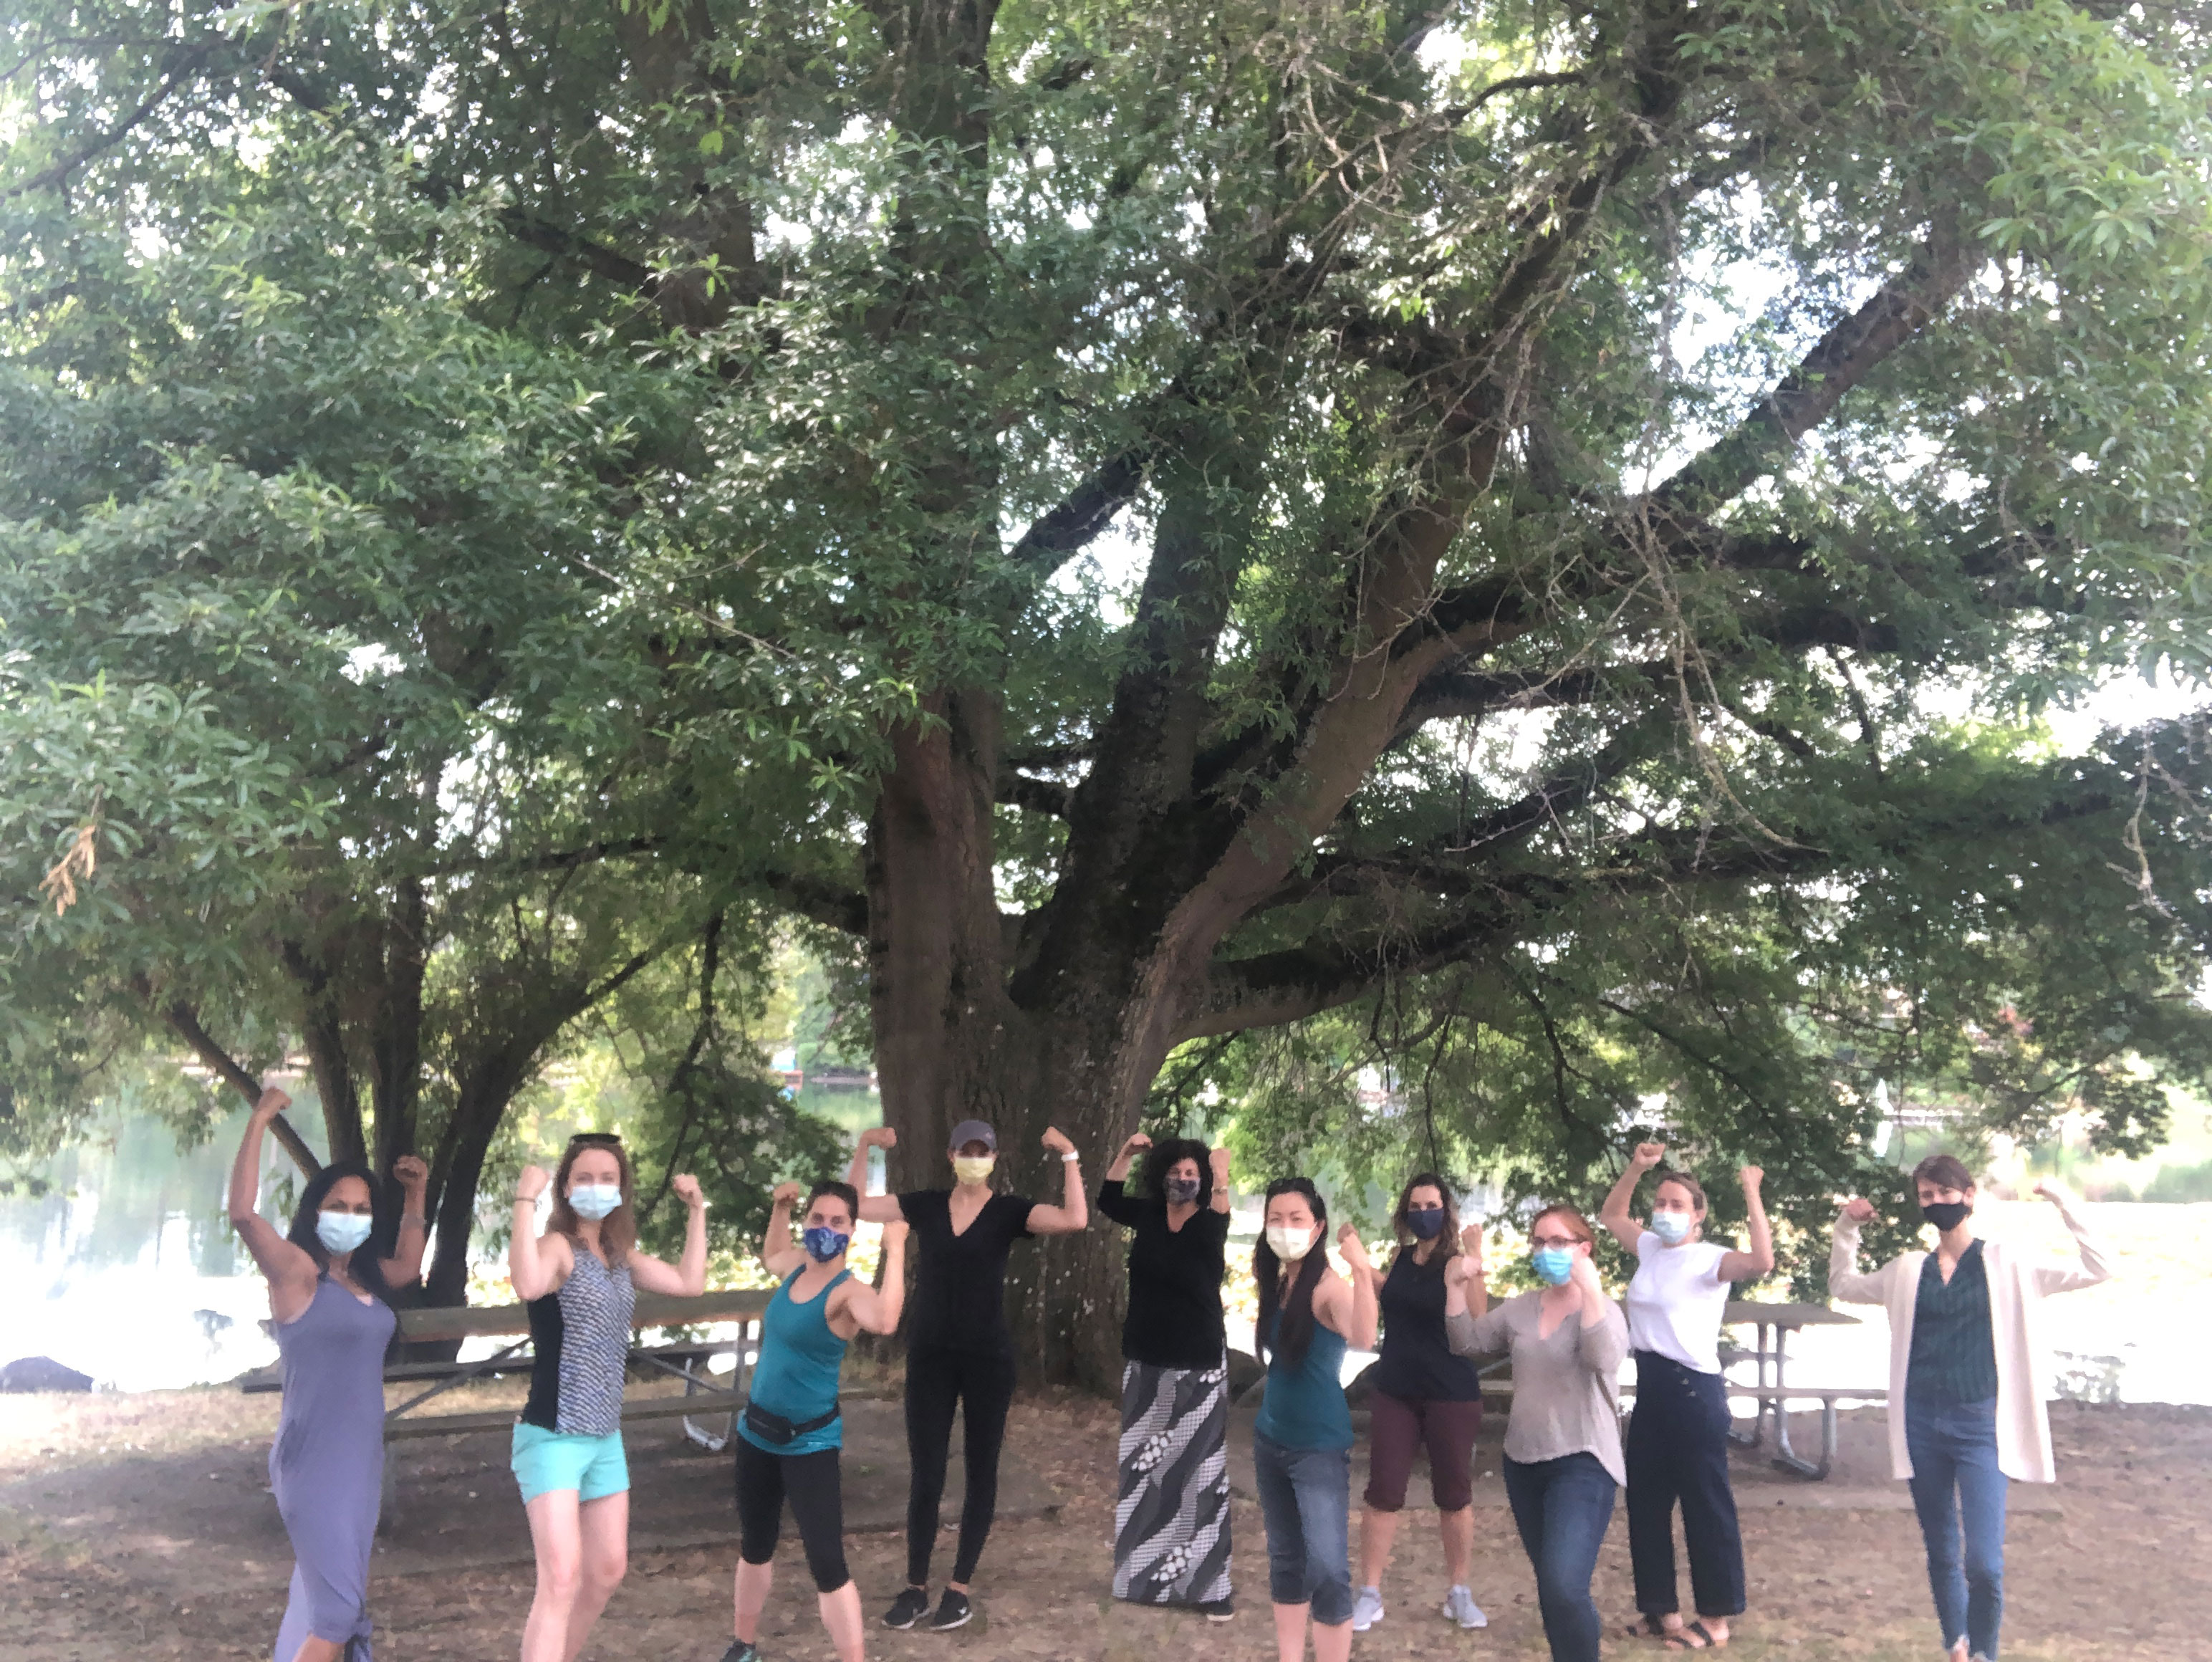 First post-COVID in person event, which was a Book Club Social (Dare to Lead by Brene Brown) held at Blue Lake Park, August 2020.